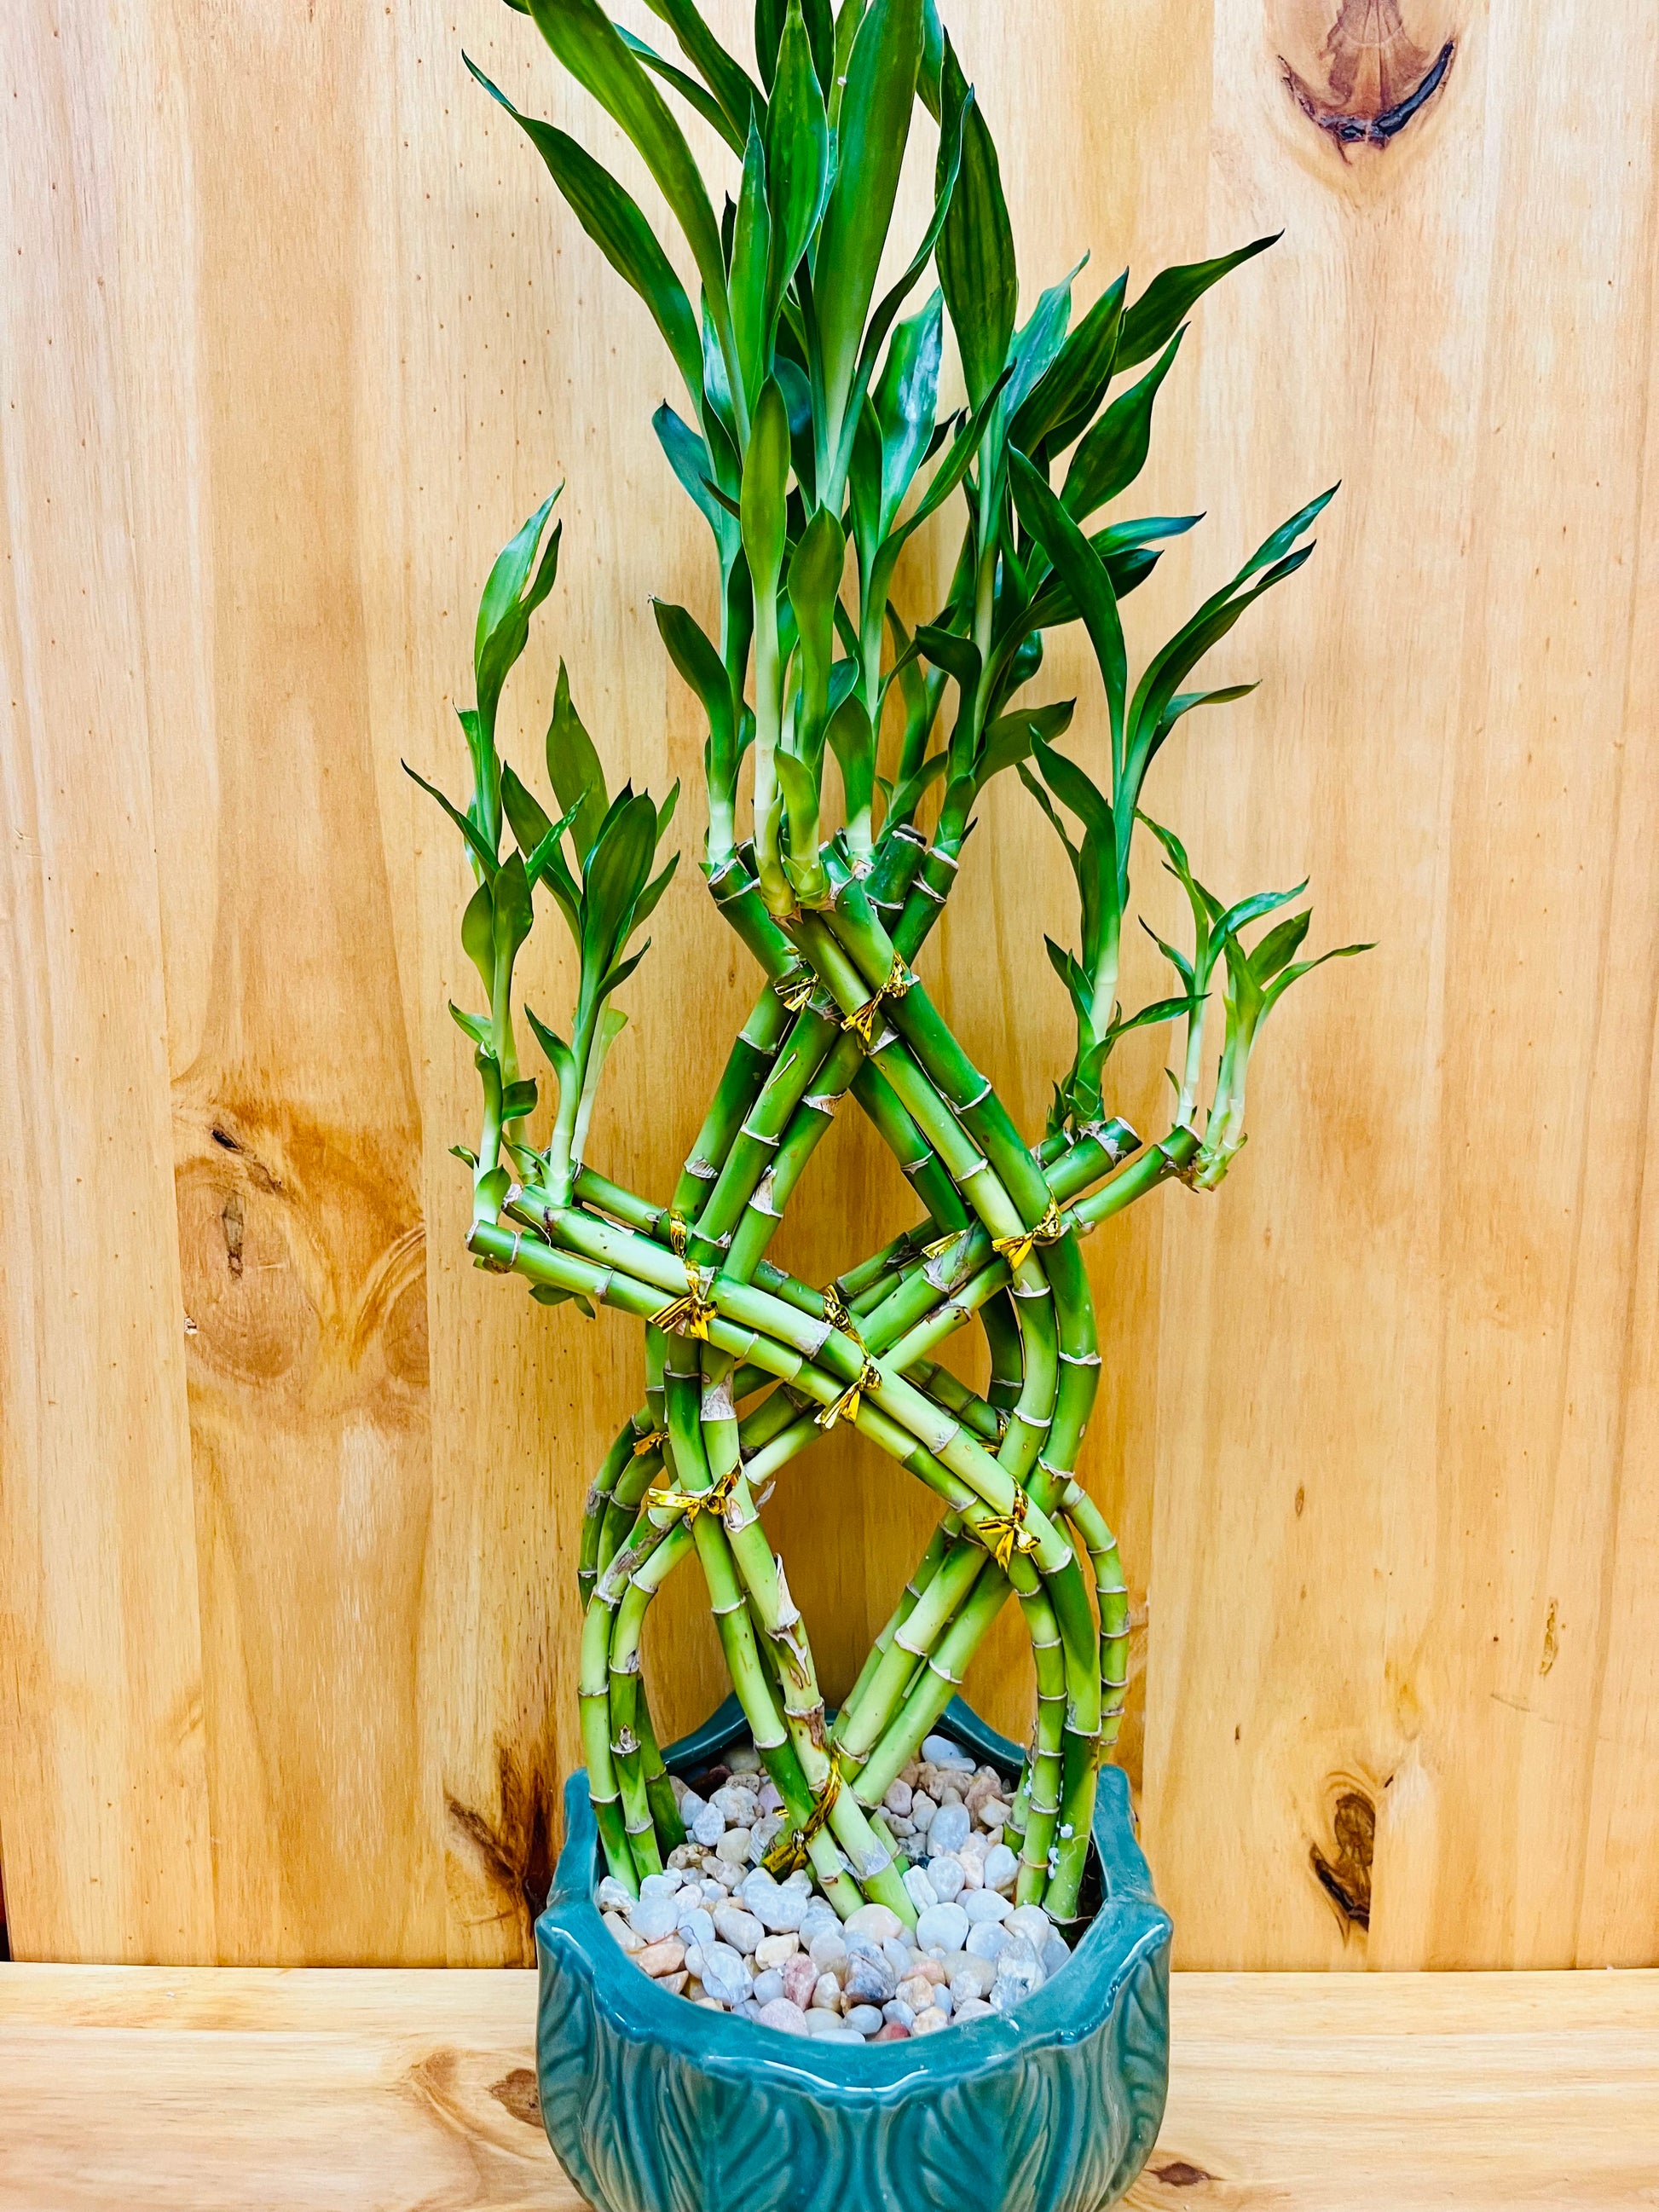 Live Braided Lucky Bamboo in Green Round Pot with River Pebbles